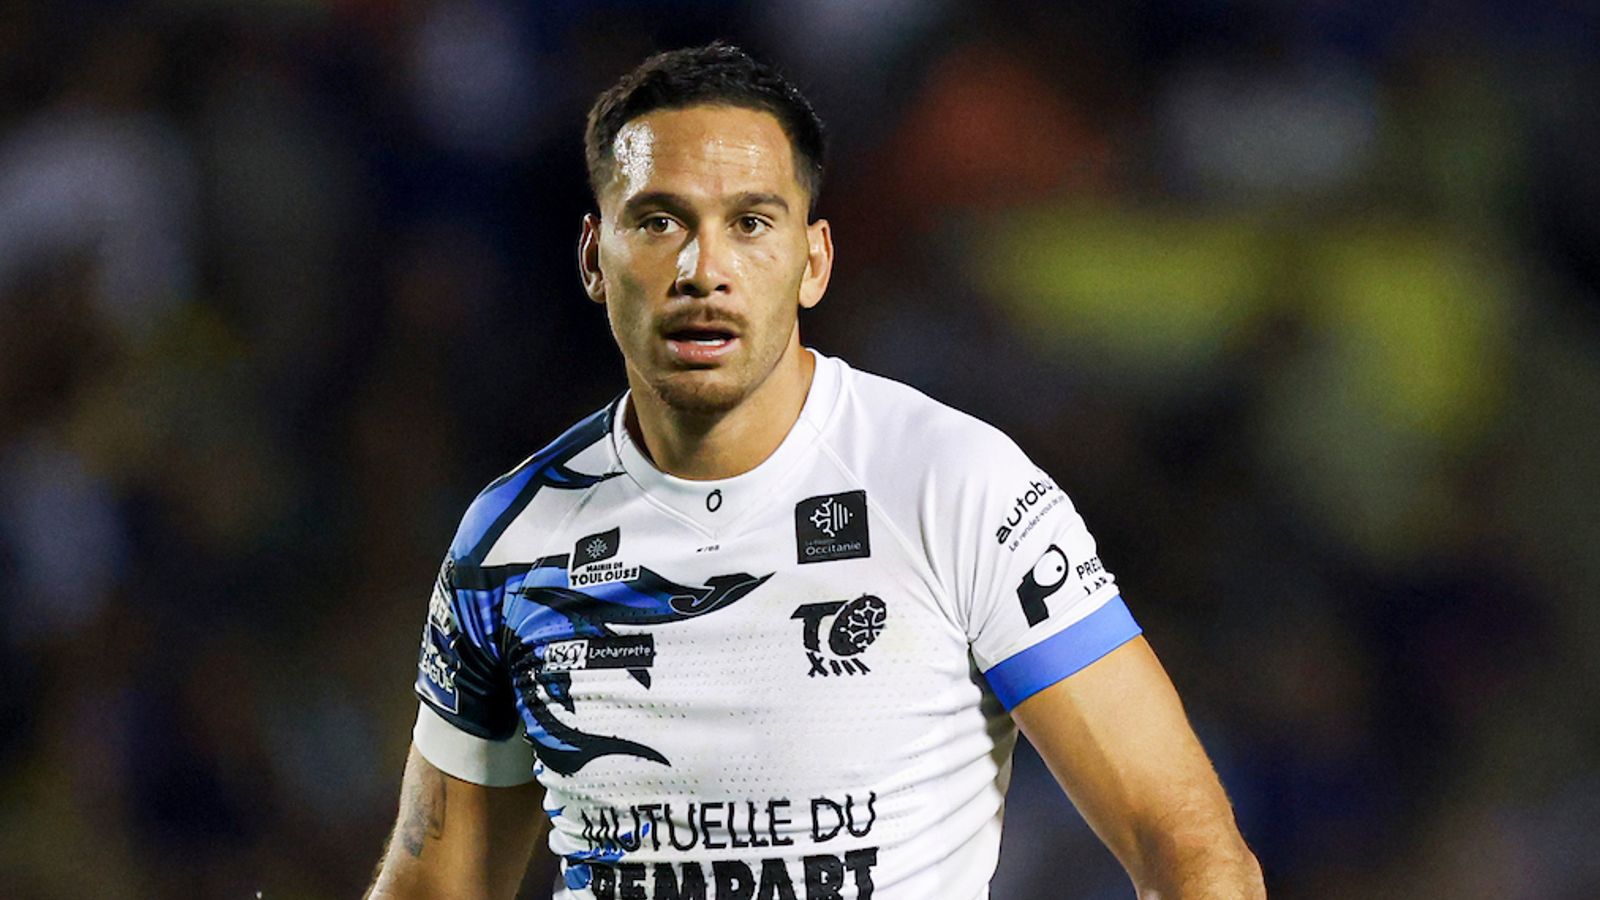 Toulouse Olympique’s Corey Norman banned for eight matches for buttock incident